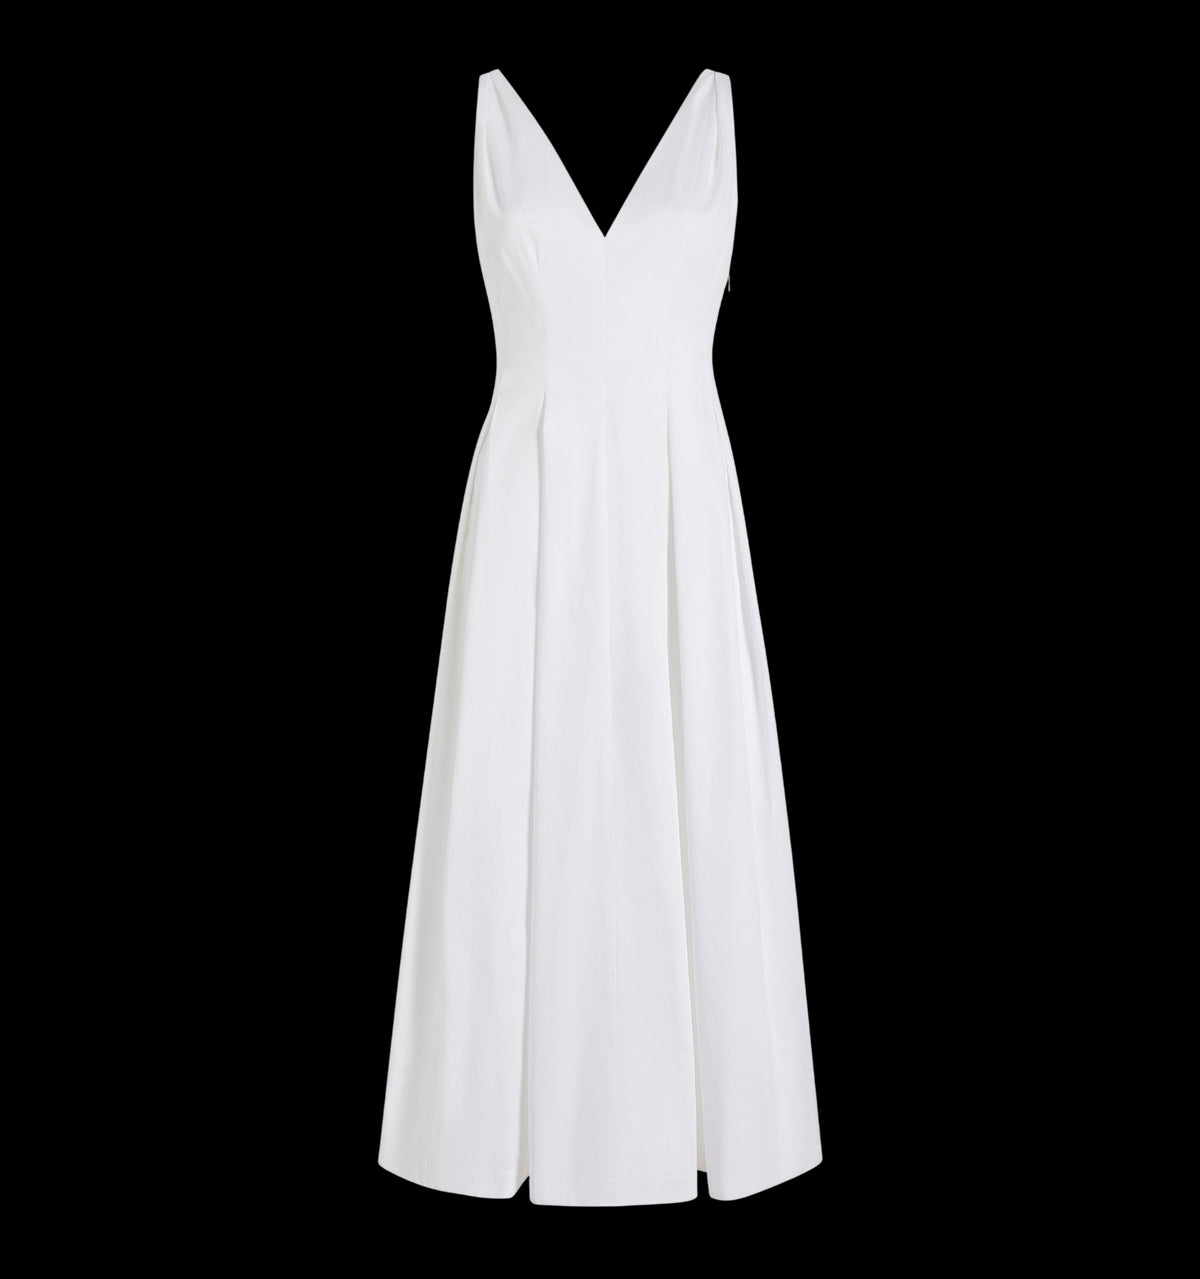 The Jacqueline Dress in White Cotton Sateen